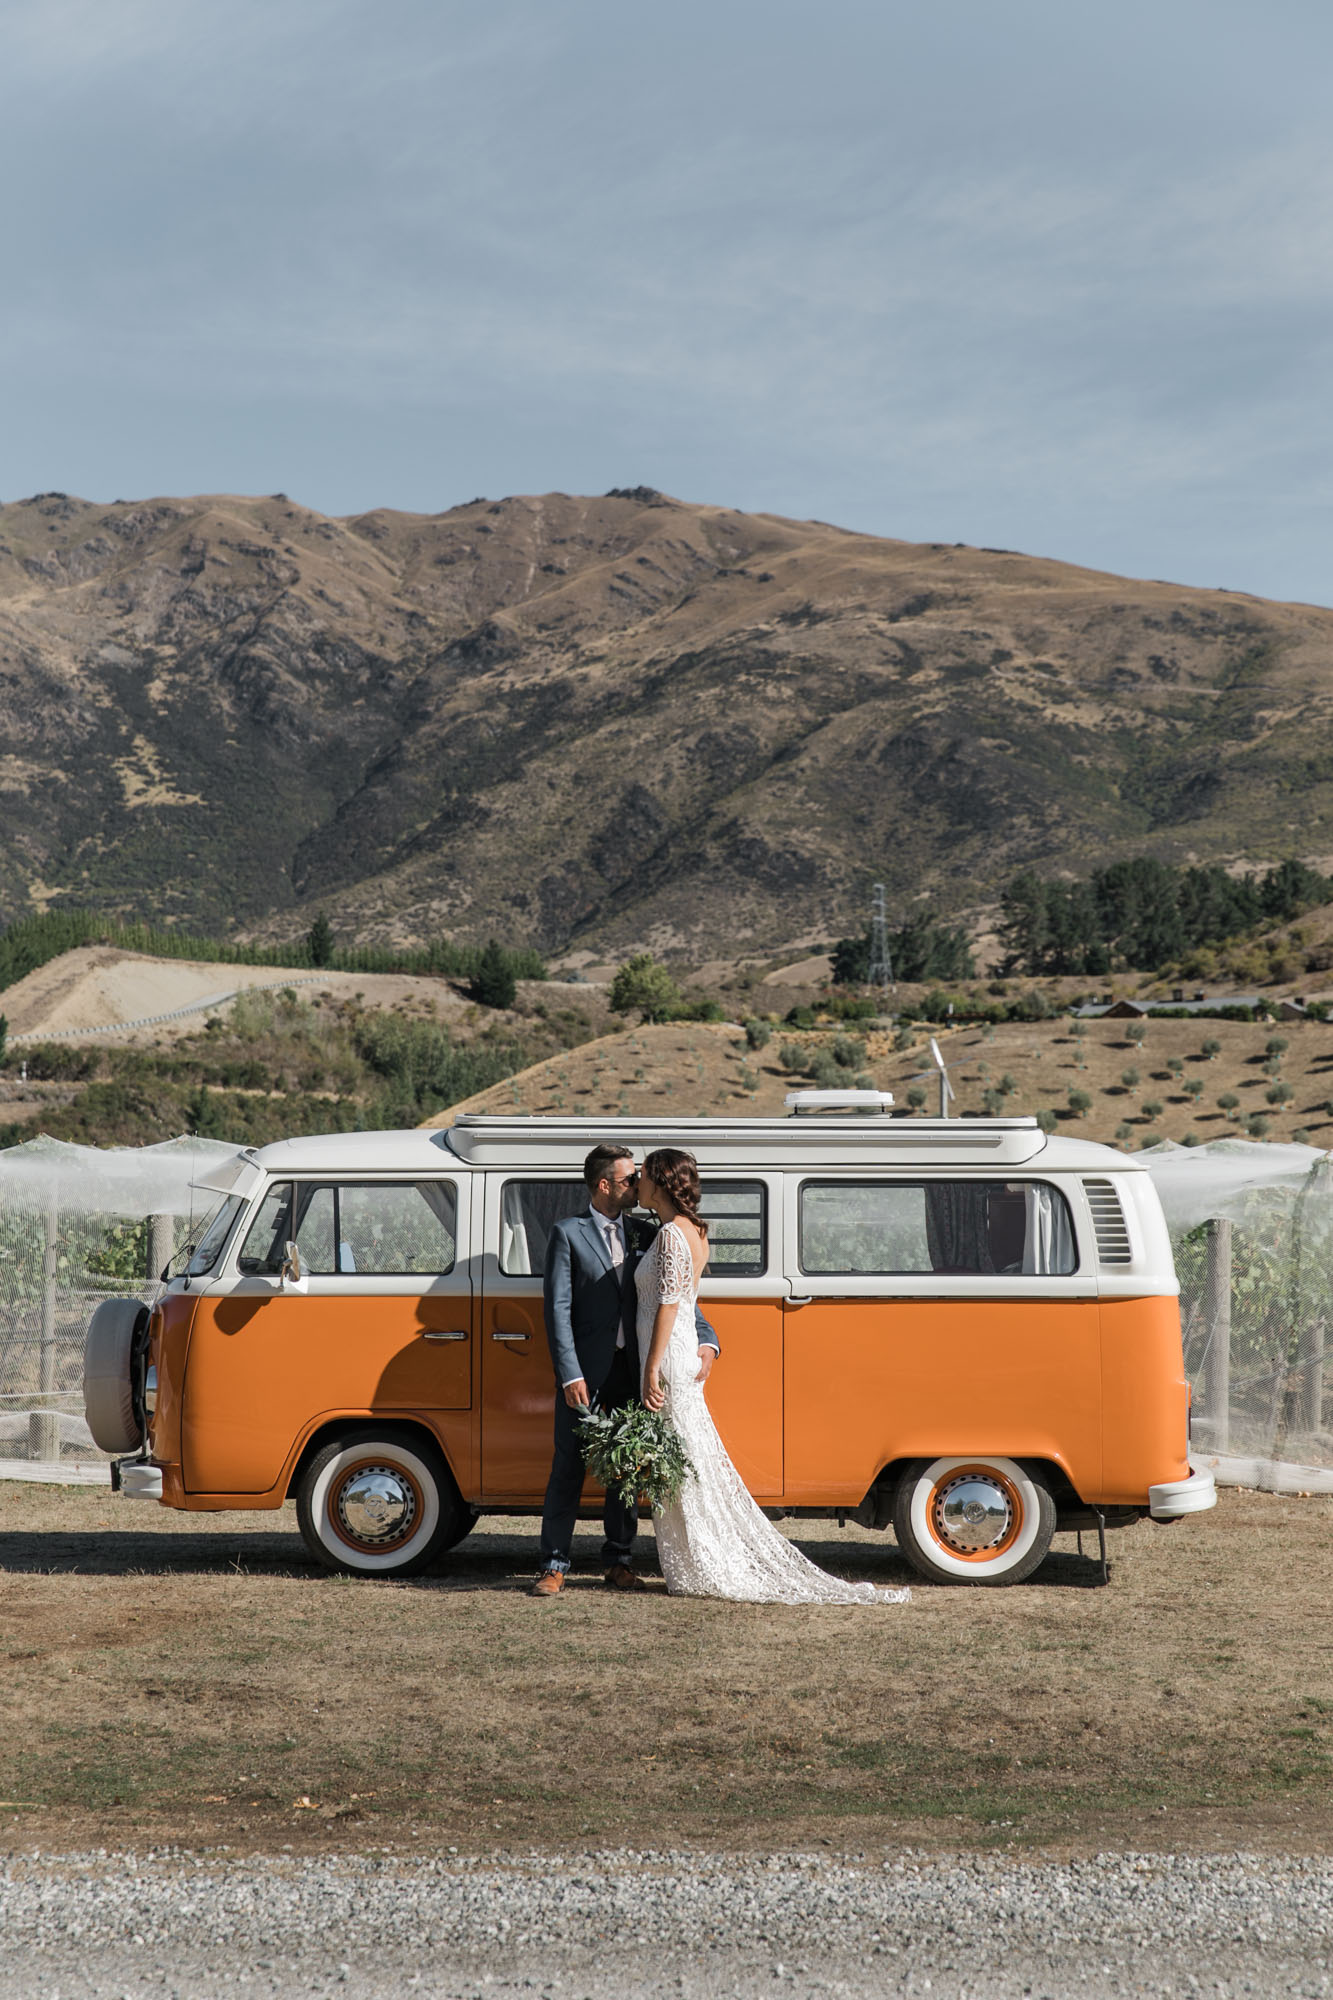 Wedding Venues In Wanaka With Great Views